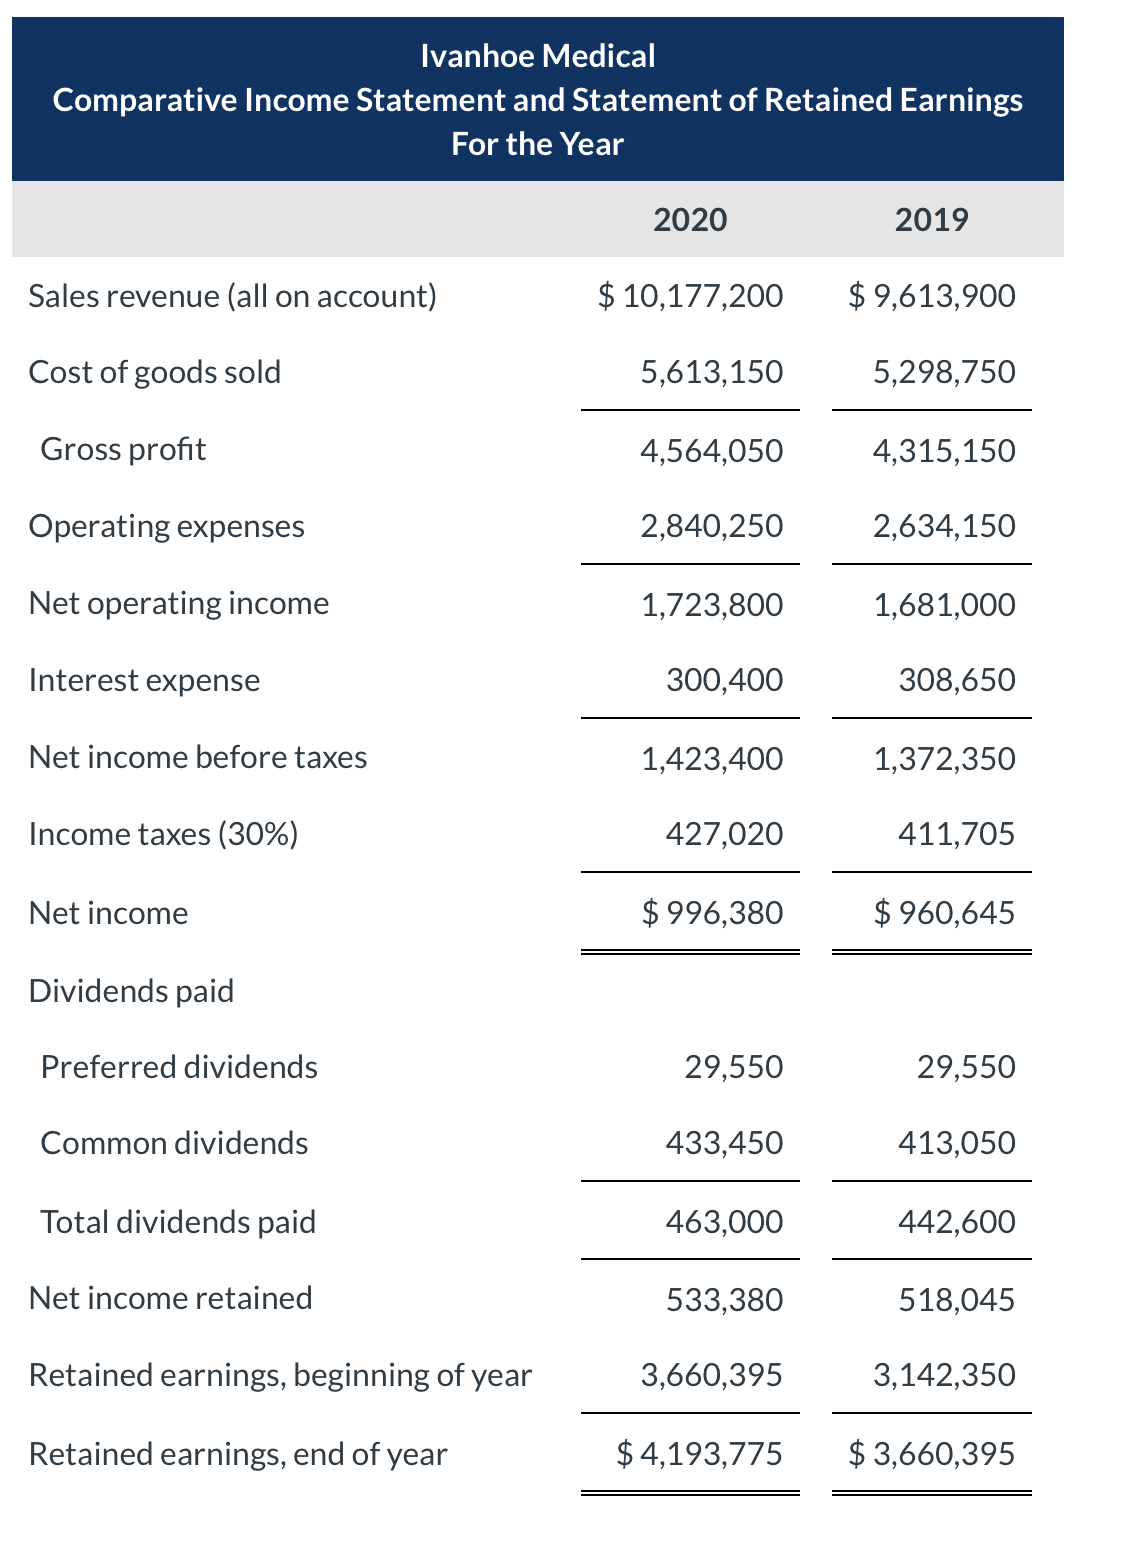 Ivanhoe Medical
Comparative Income Statement and Statement of Retained Earnings
For the Year
2020
2019
Sales revenue (all on account)
$ 10,177,200
$ 9,613,900
Cost of goods sold
5,613,150
5,298,750
Gross profit
4,564,050
4,315,150
Operating expenses
2,840,250
2,634,150
Net operating income
1,723,800
1,681,000
Interest expense
300,400
308,650
Net income before taxes
1,423,400
1,372,350
Income taxes (30%)
427,020
411,705
Net income
$ 996,380
$ 960,645
Dividends paid
Preferred dividends
29,550
29,550
Common dividends
433,450
413,050
Total dividends paid
463,000
442,600
Net income retained
533,380
518,045
Retained earnings, beginning of year
3,660,395
3,142,350
Retained earnings, end of year
$ 4,193,775
$ 3,660,395
